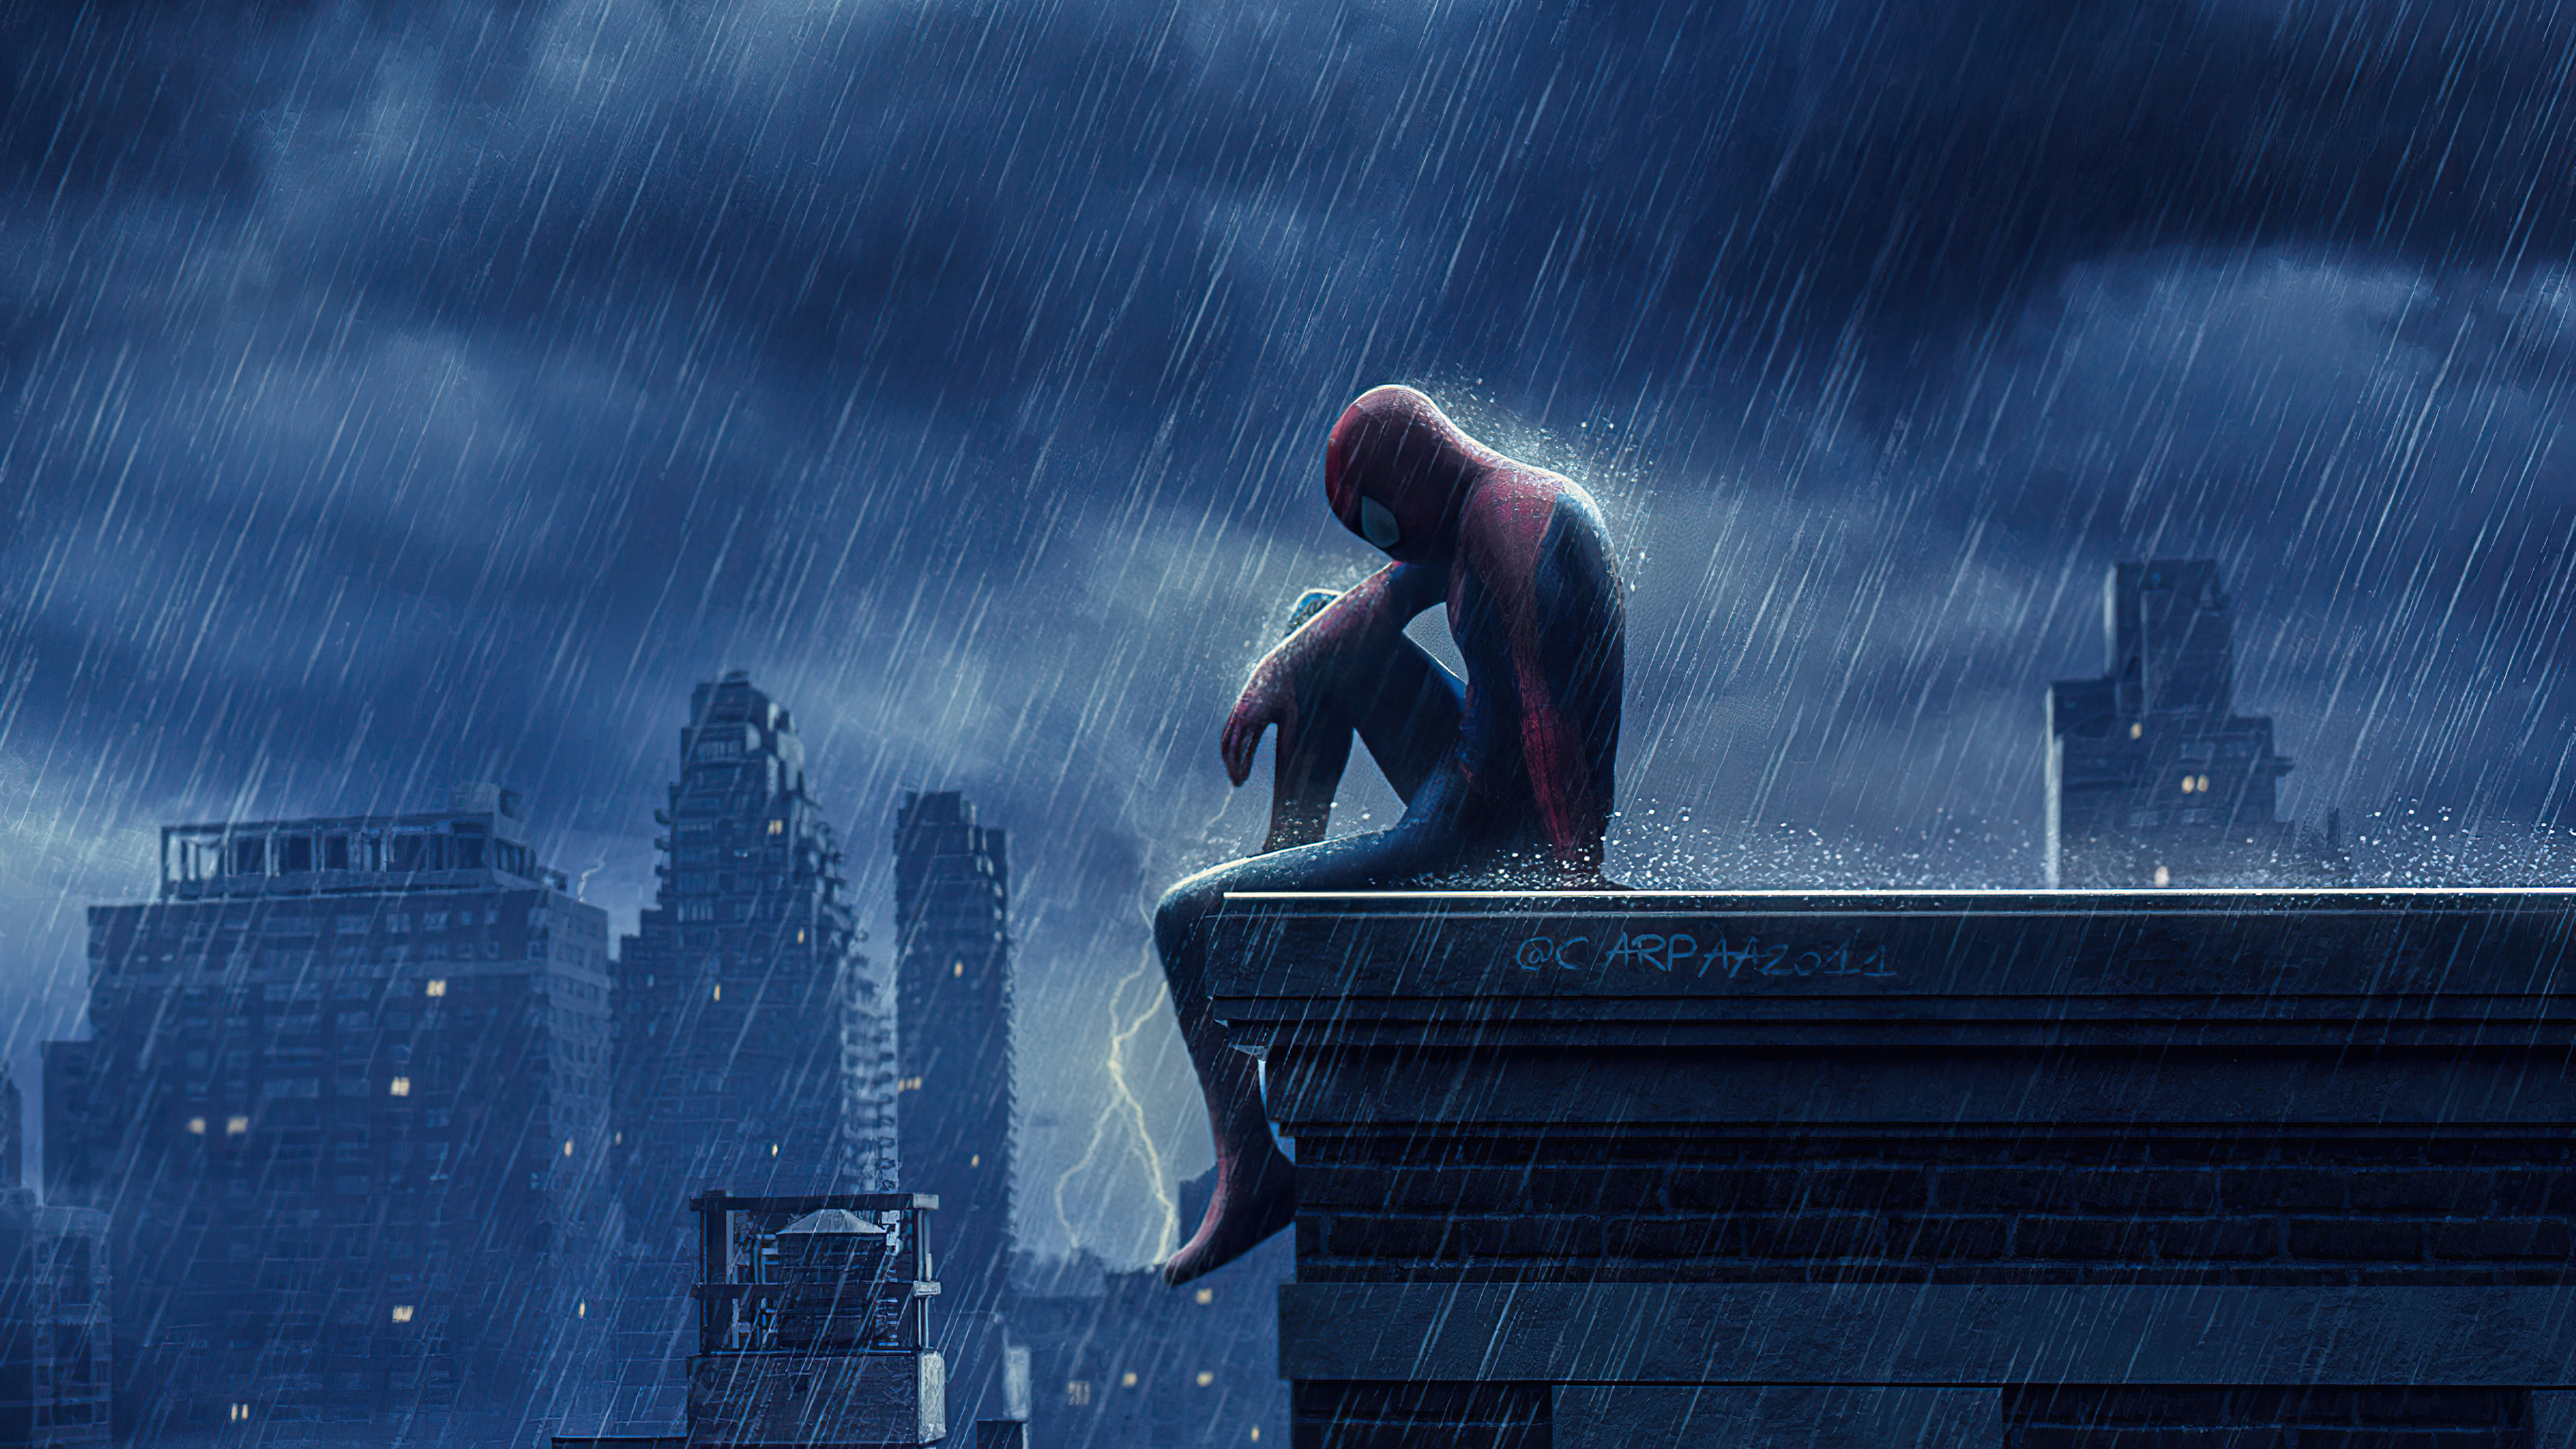 Movie Spider-Man: No Way Home 4k Ultra HD Wallpaper by Carpaa